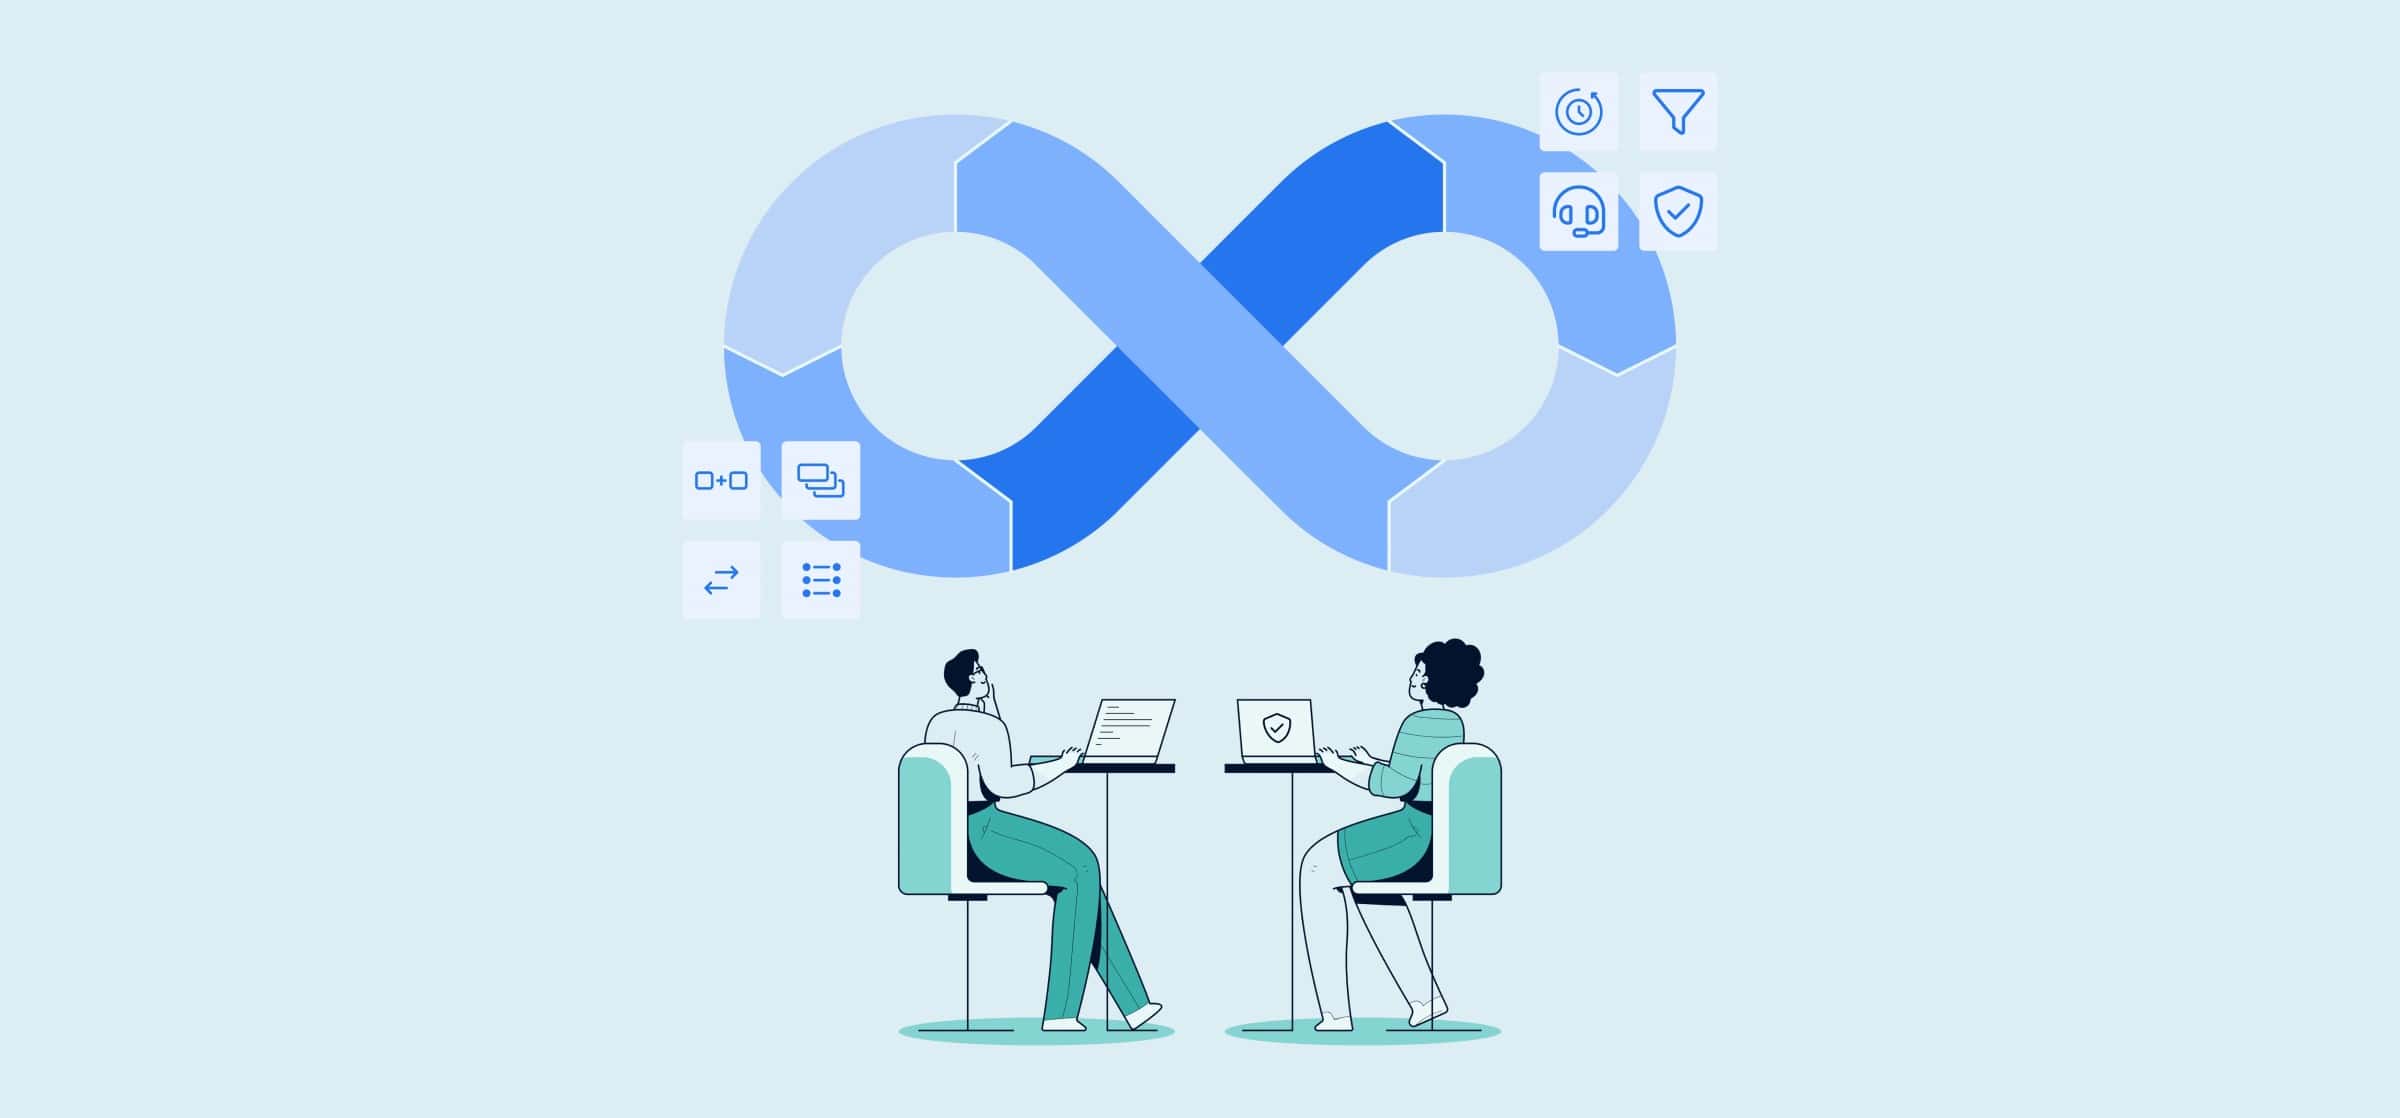 An illustration of two people working at laptops under an infinity sign, representing rolling migrations.